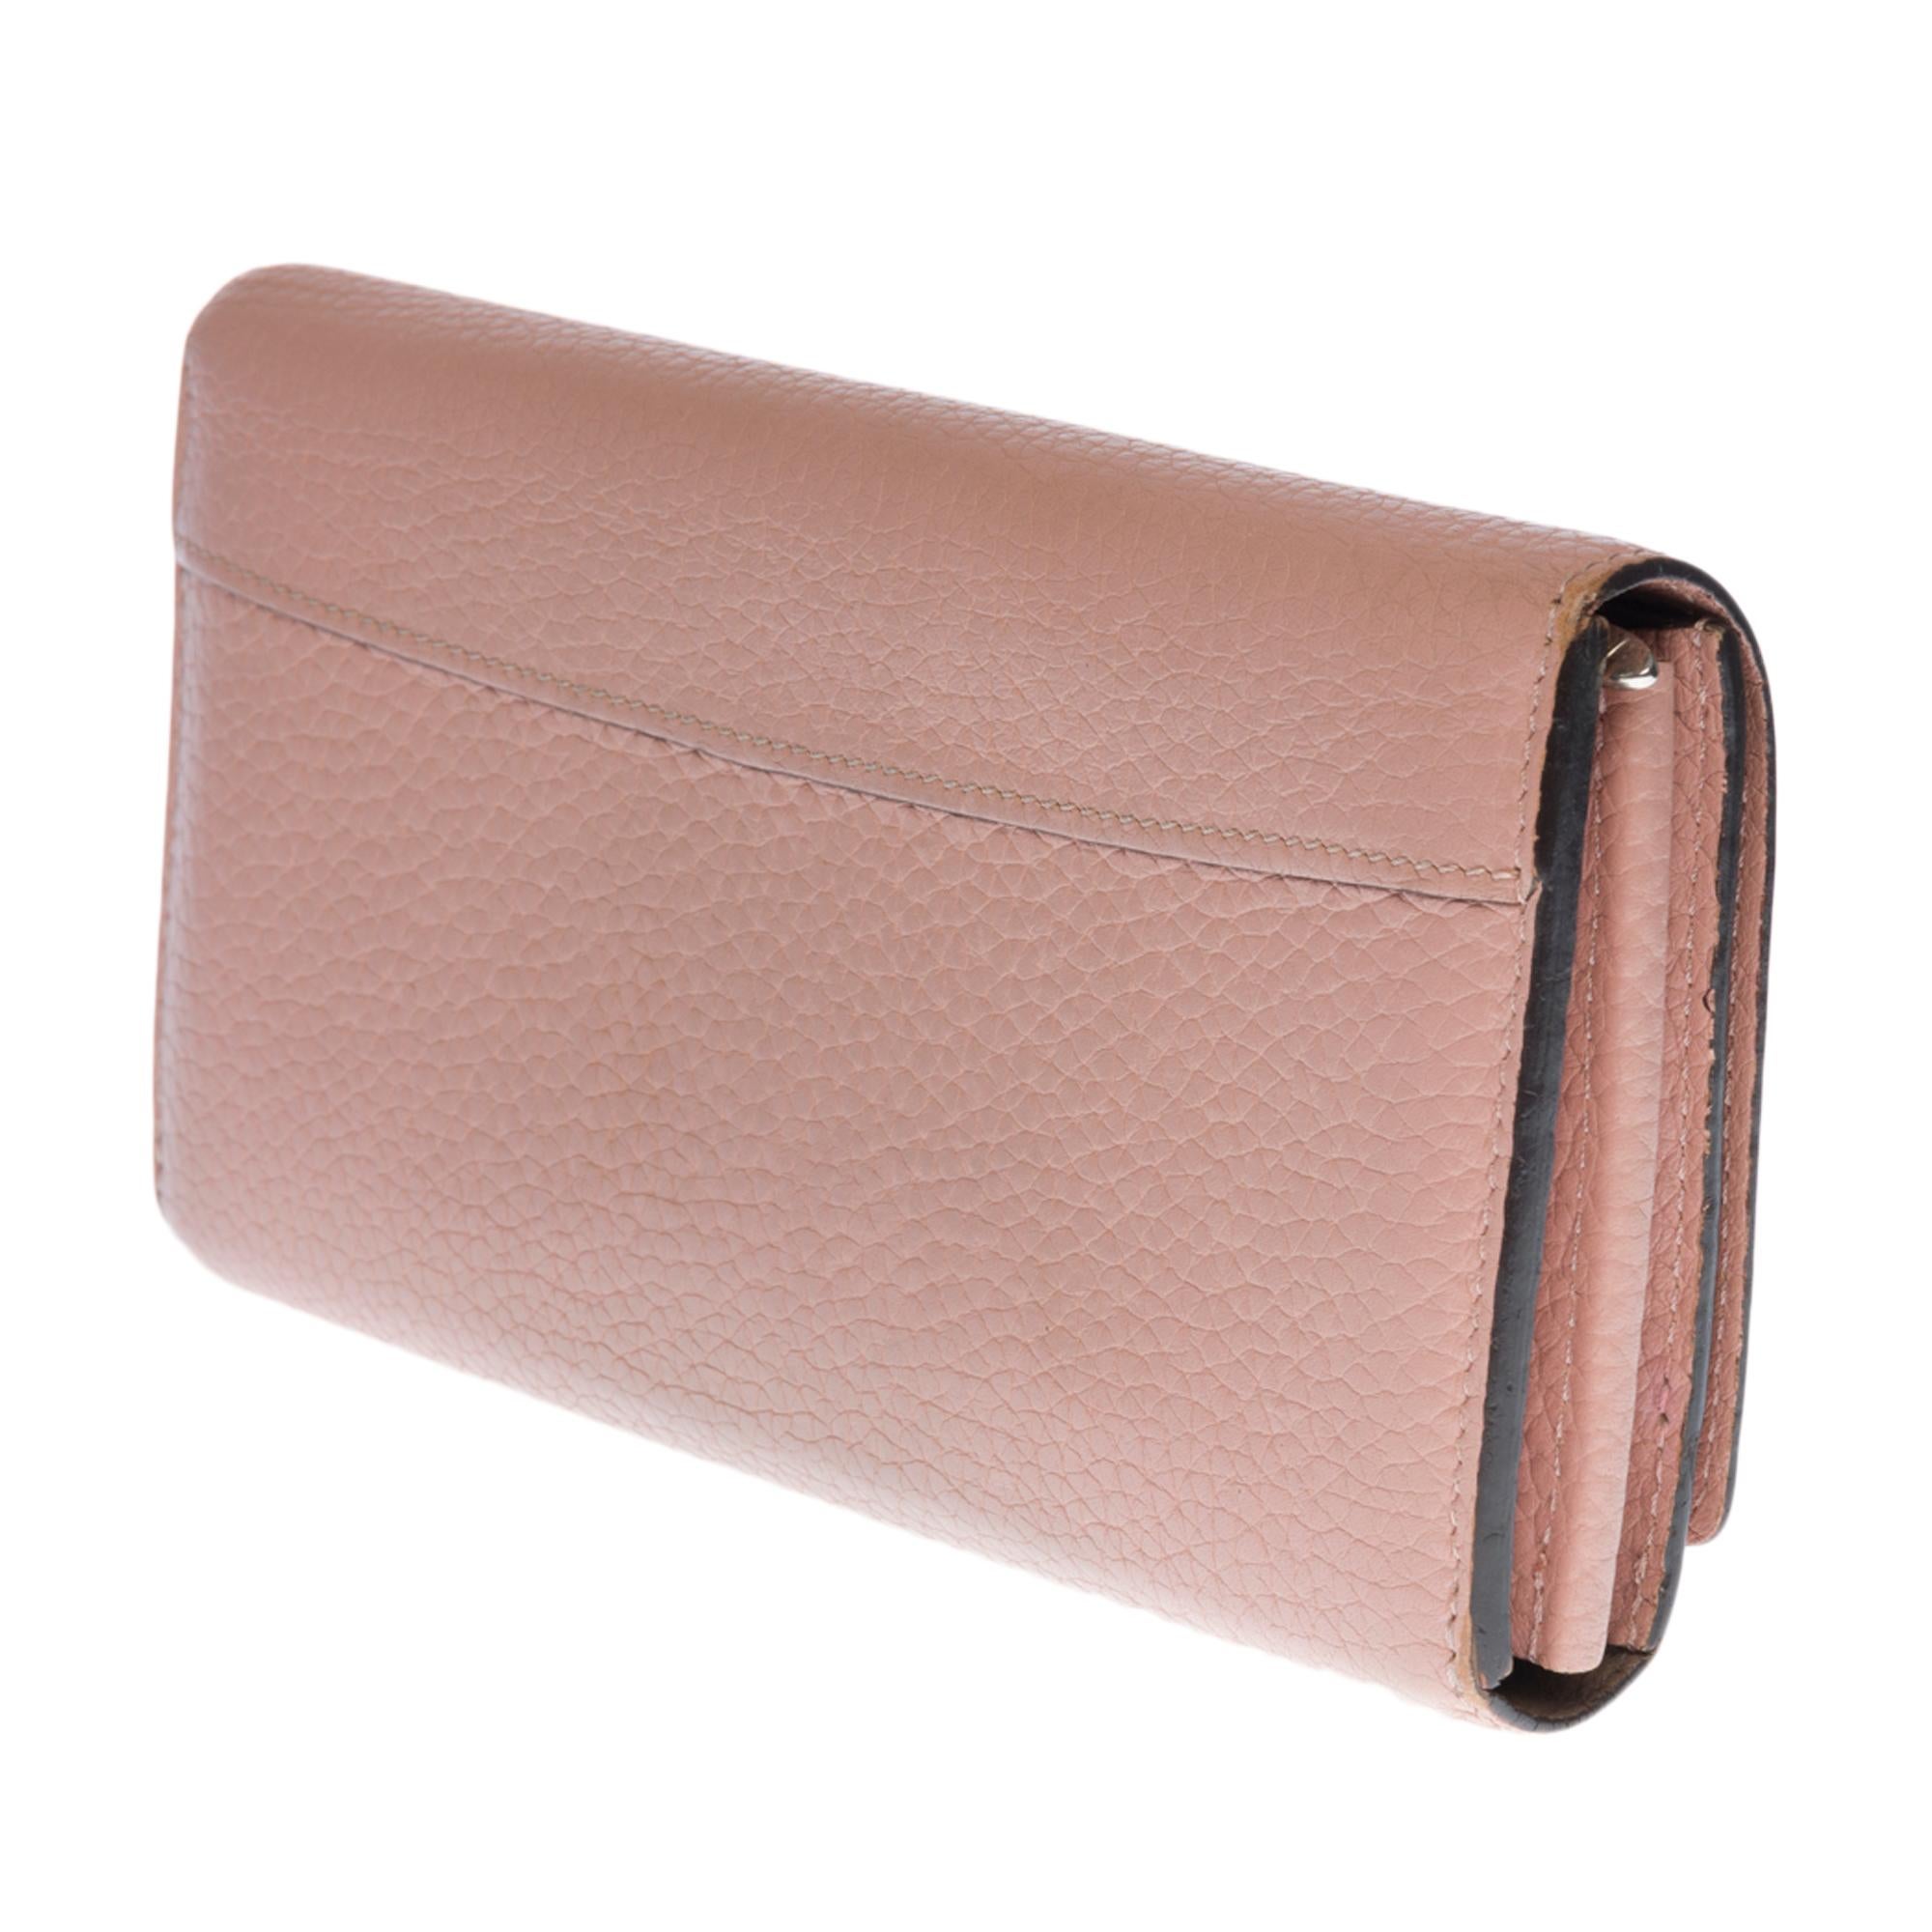 Beige Louis Vuitton Capucines GM Wallet in Pink Taurillon leather and SHW 